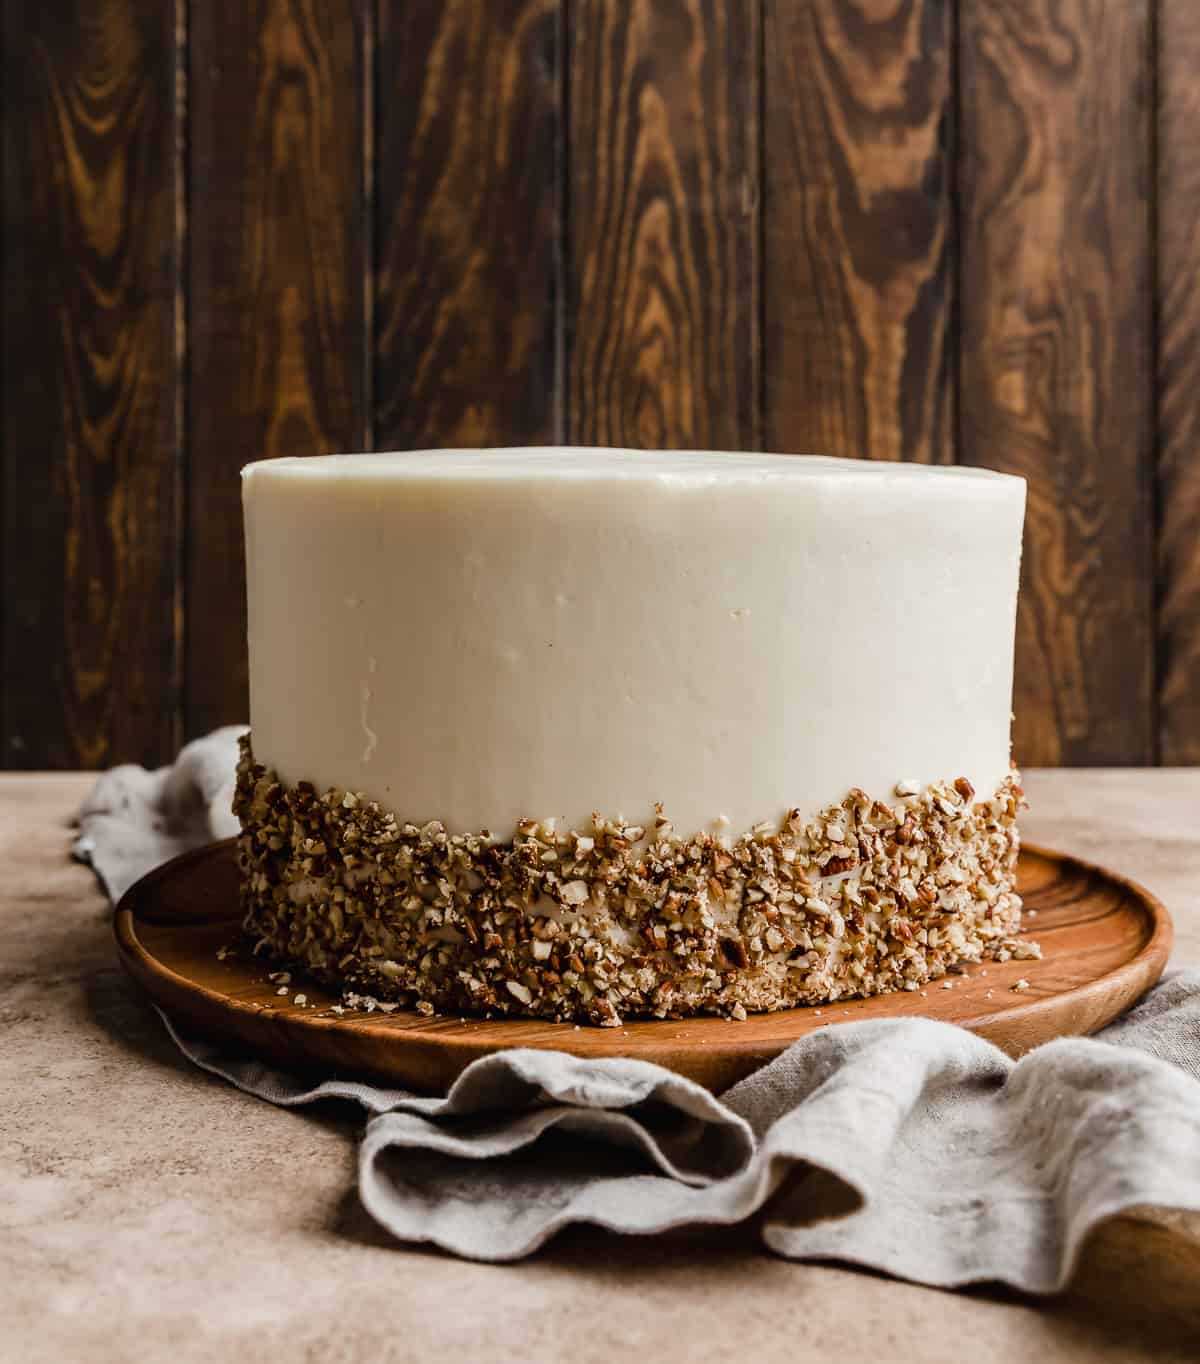 A layered carrot cake with cream cheese frosting and chopped pecans along the bottom third of the cake. 